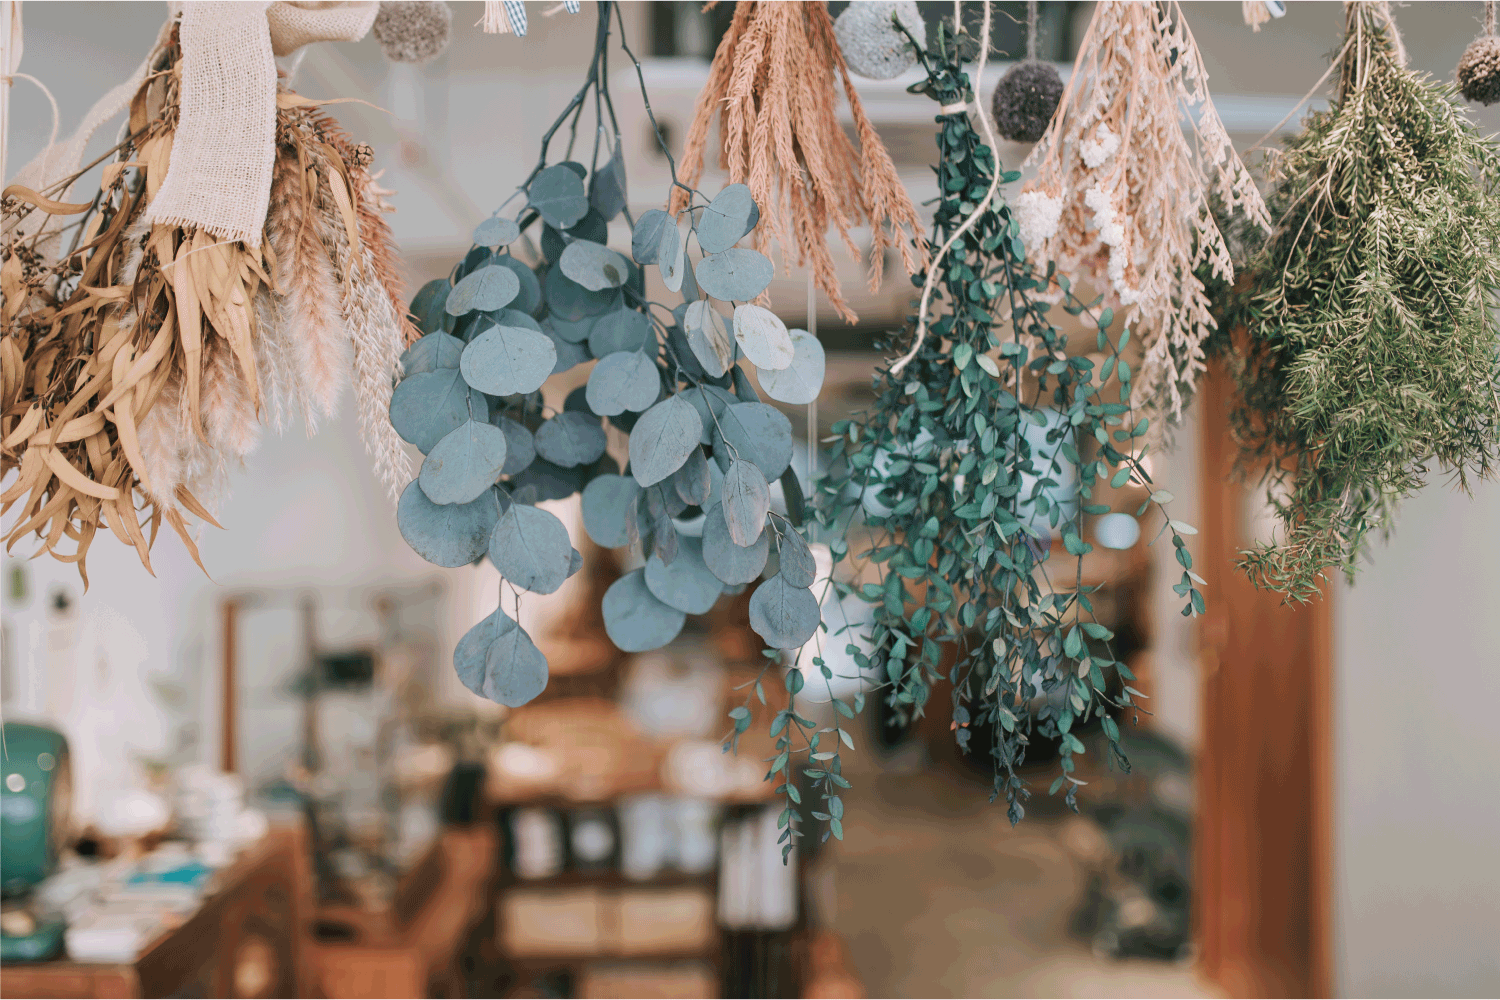 Interior of cozy café coffee shop small business with dried plant hanging